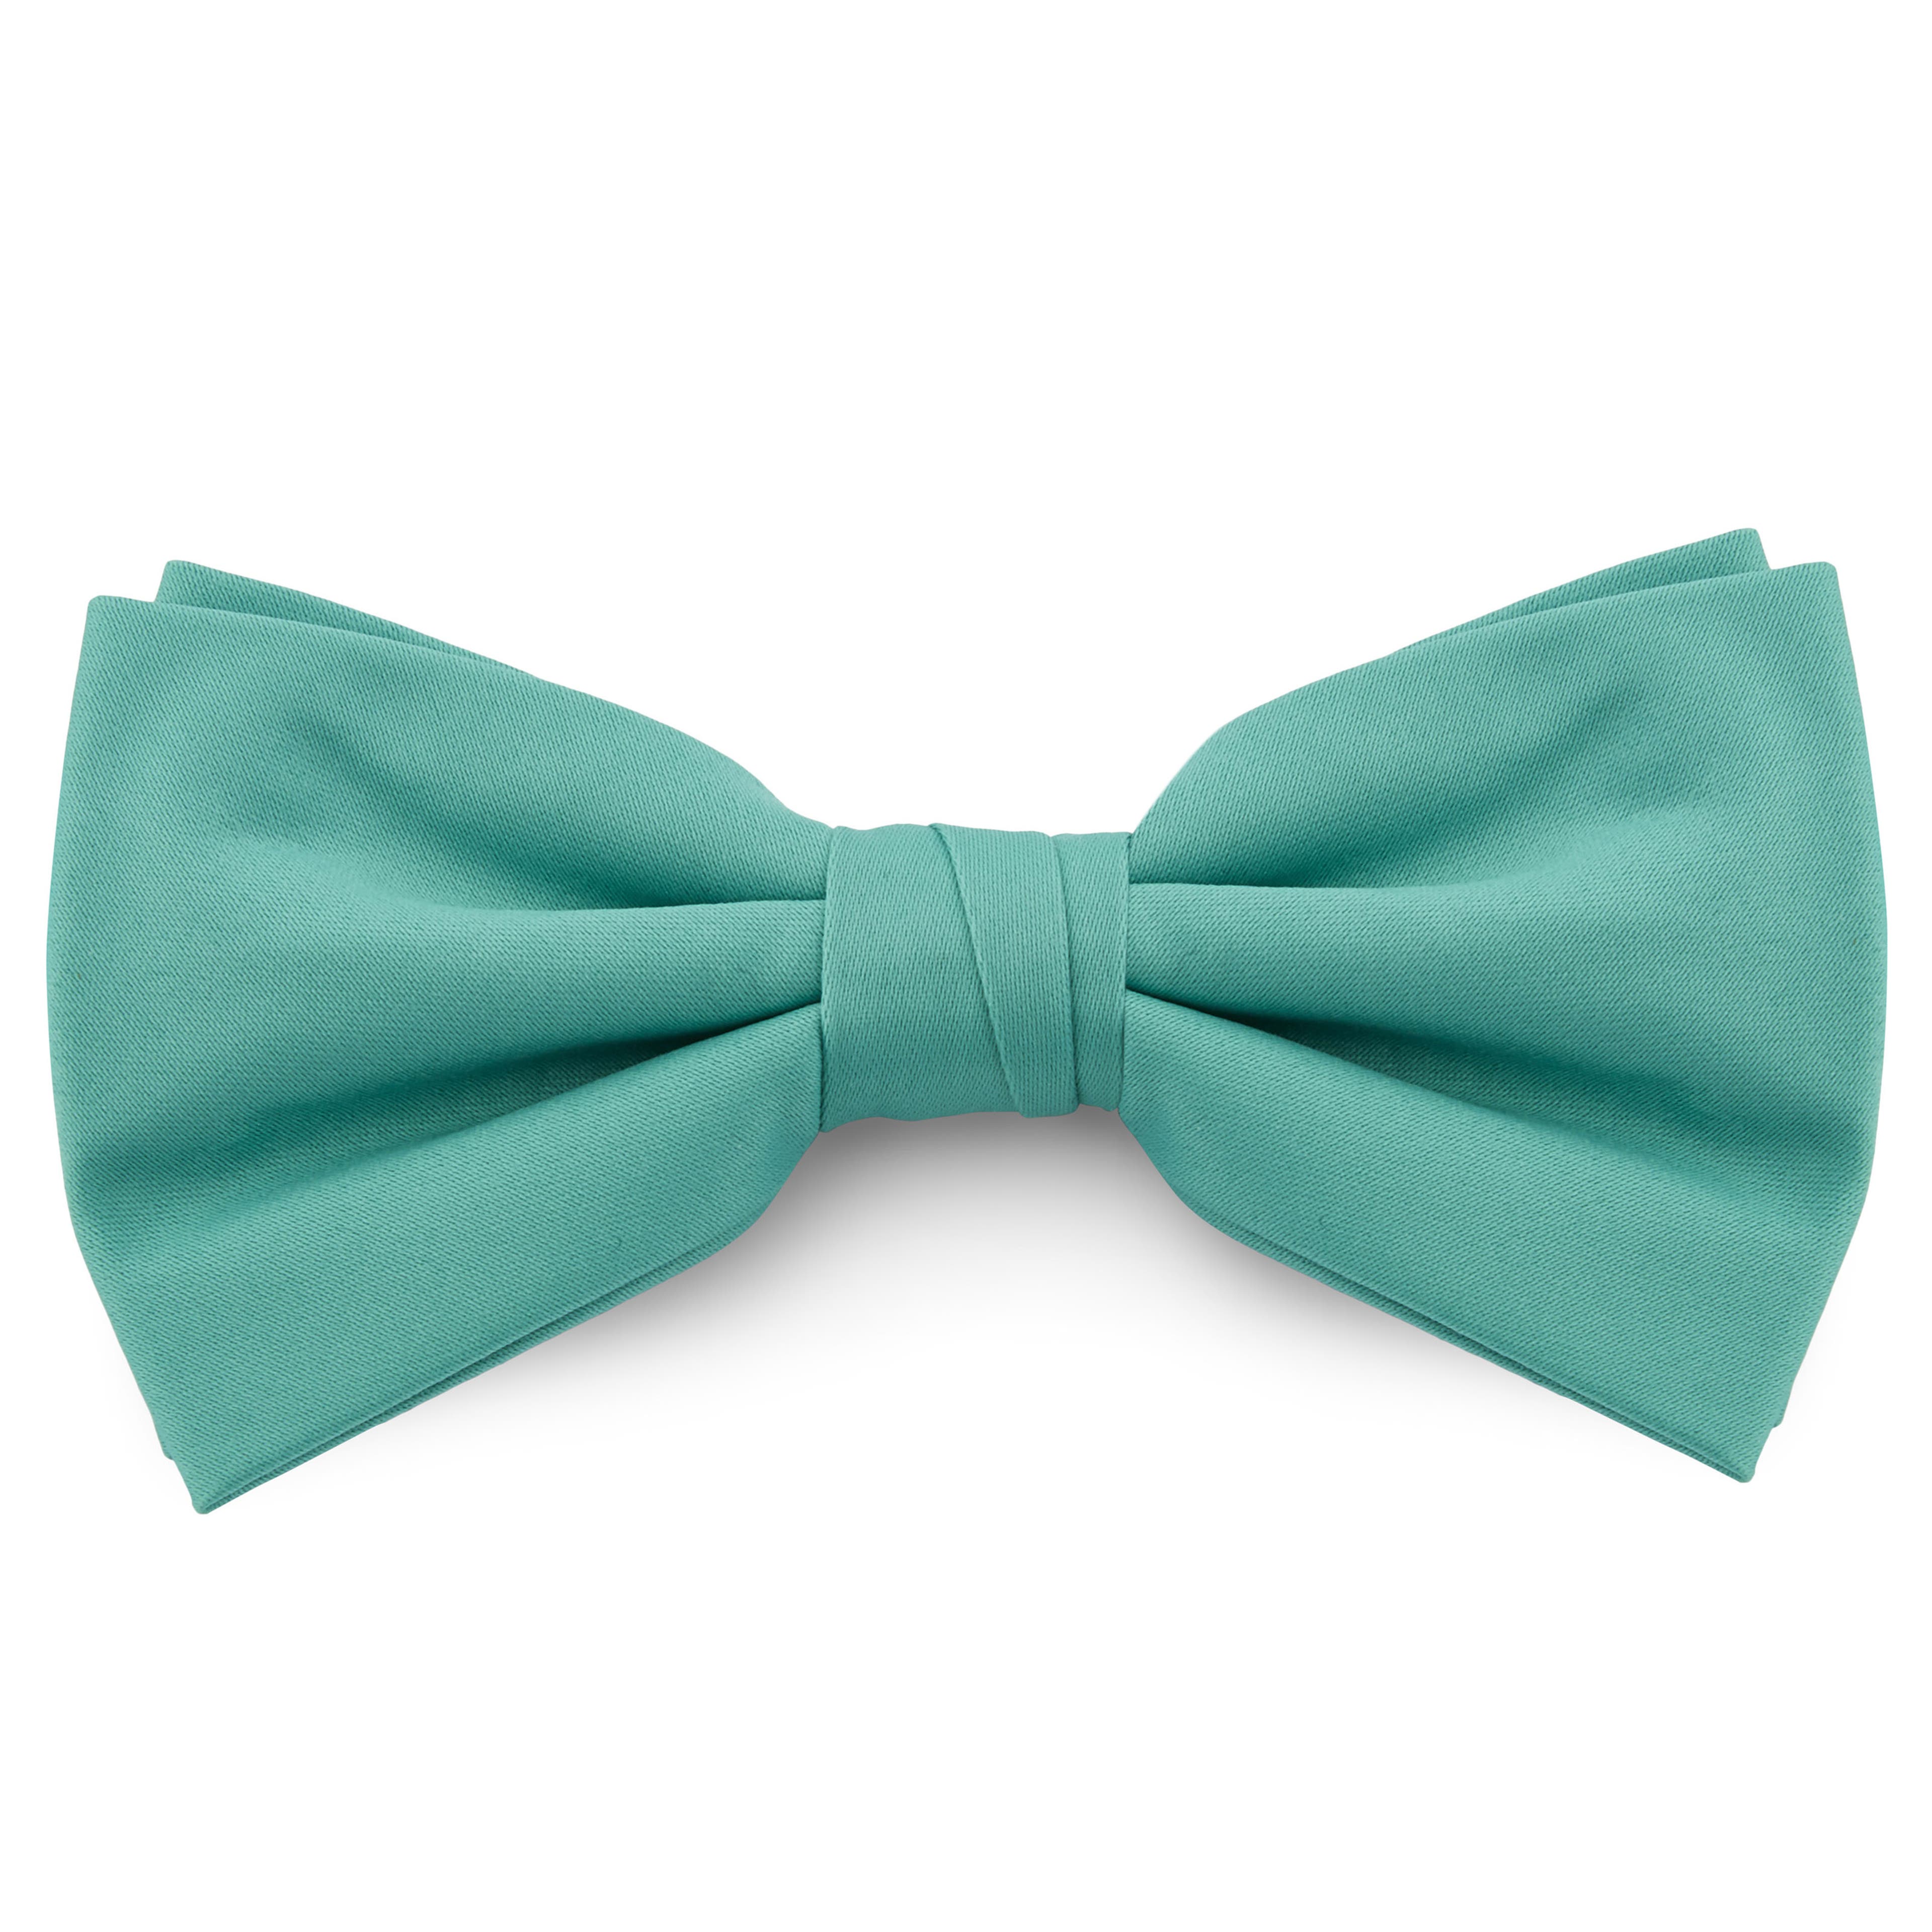 Turquoise Basic Pre-Tied Bow Tie, In stock!